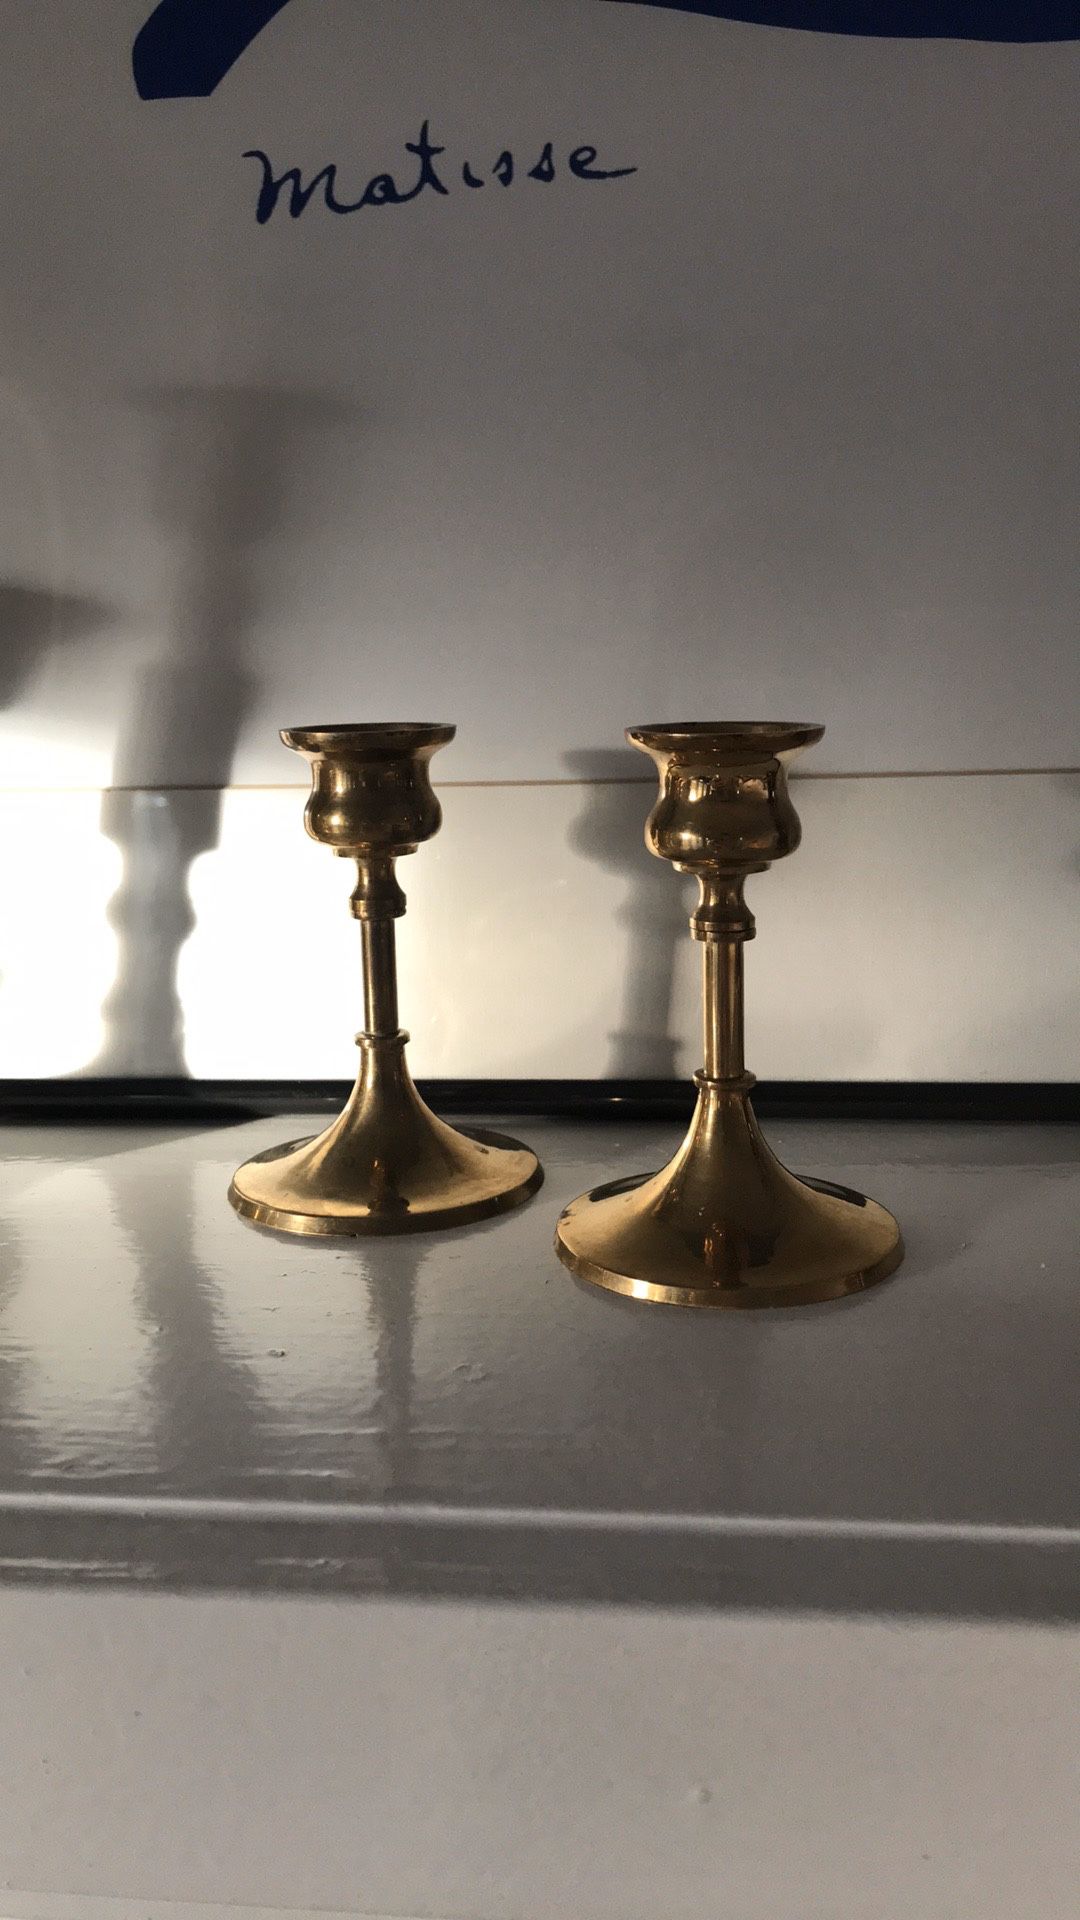 Pair of vintage brass candle holders